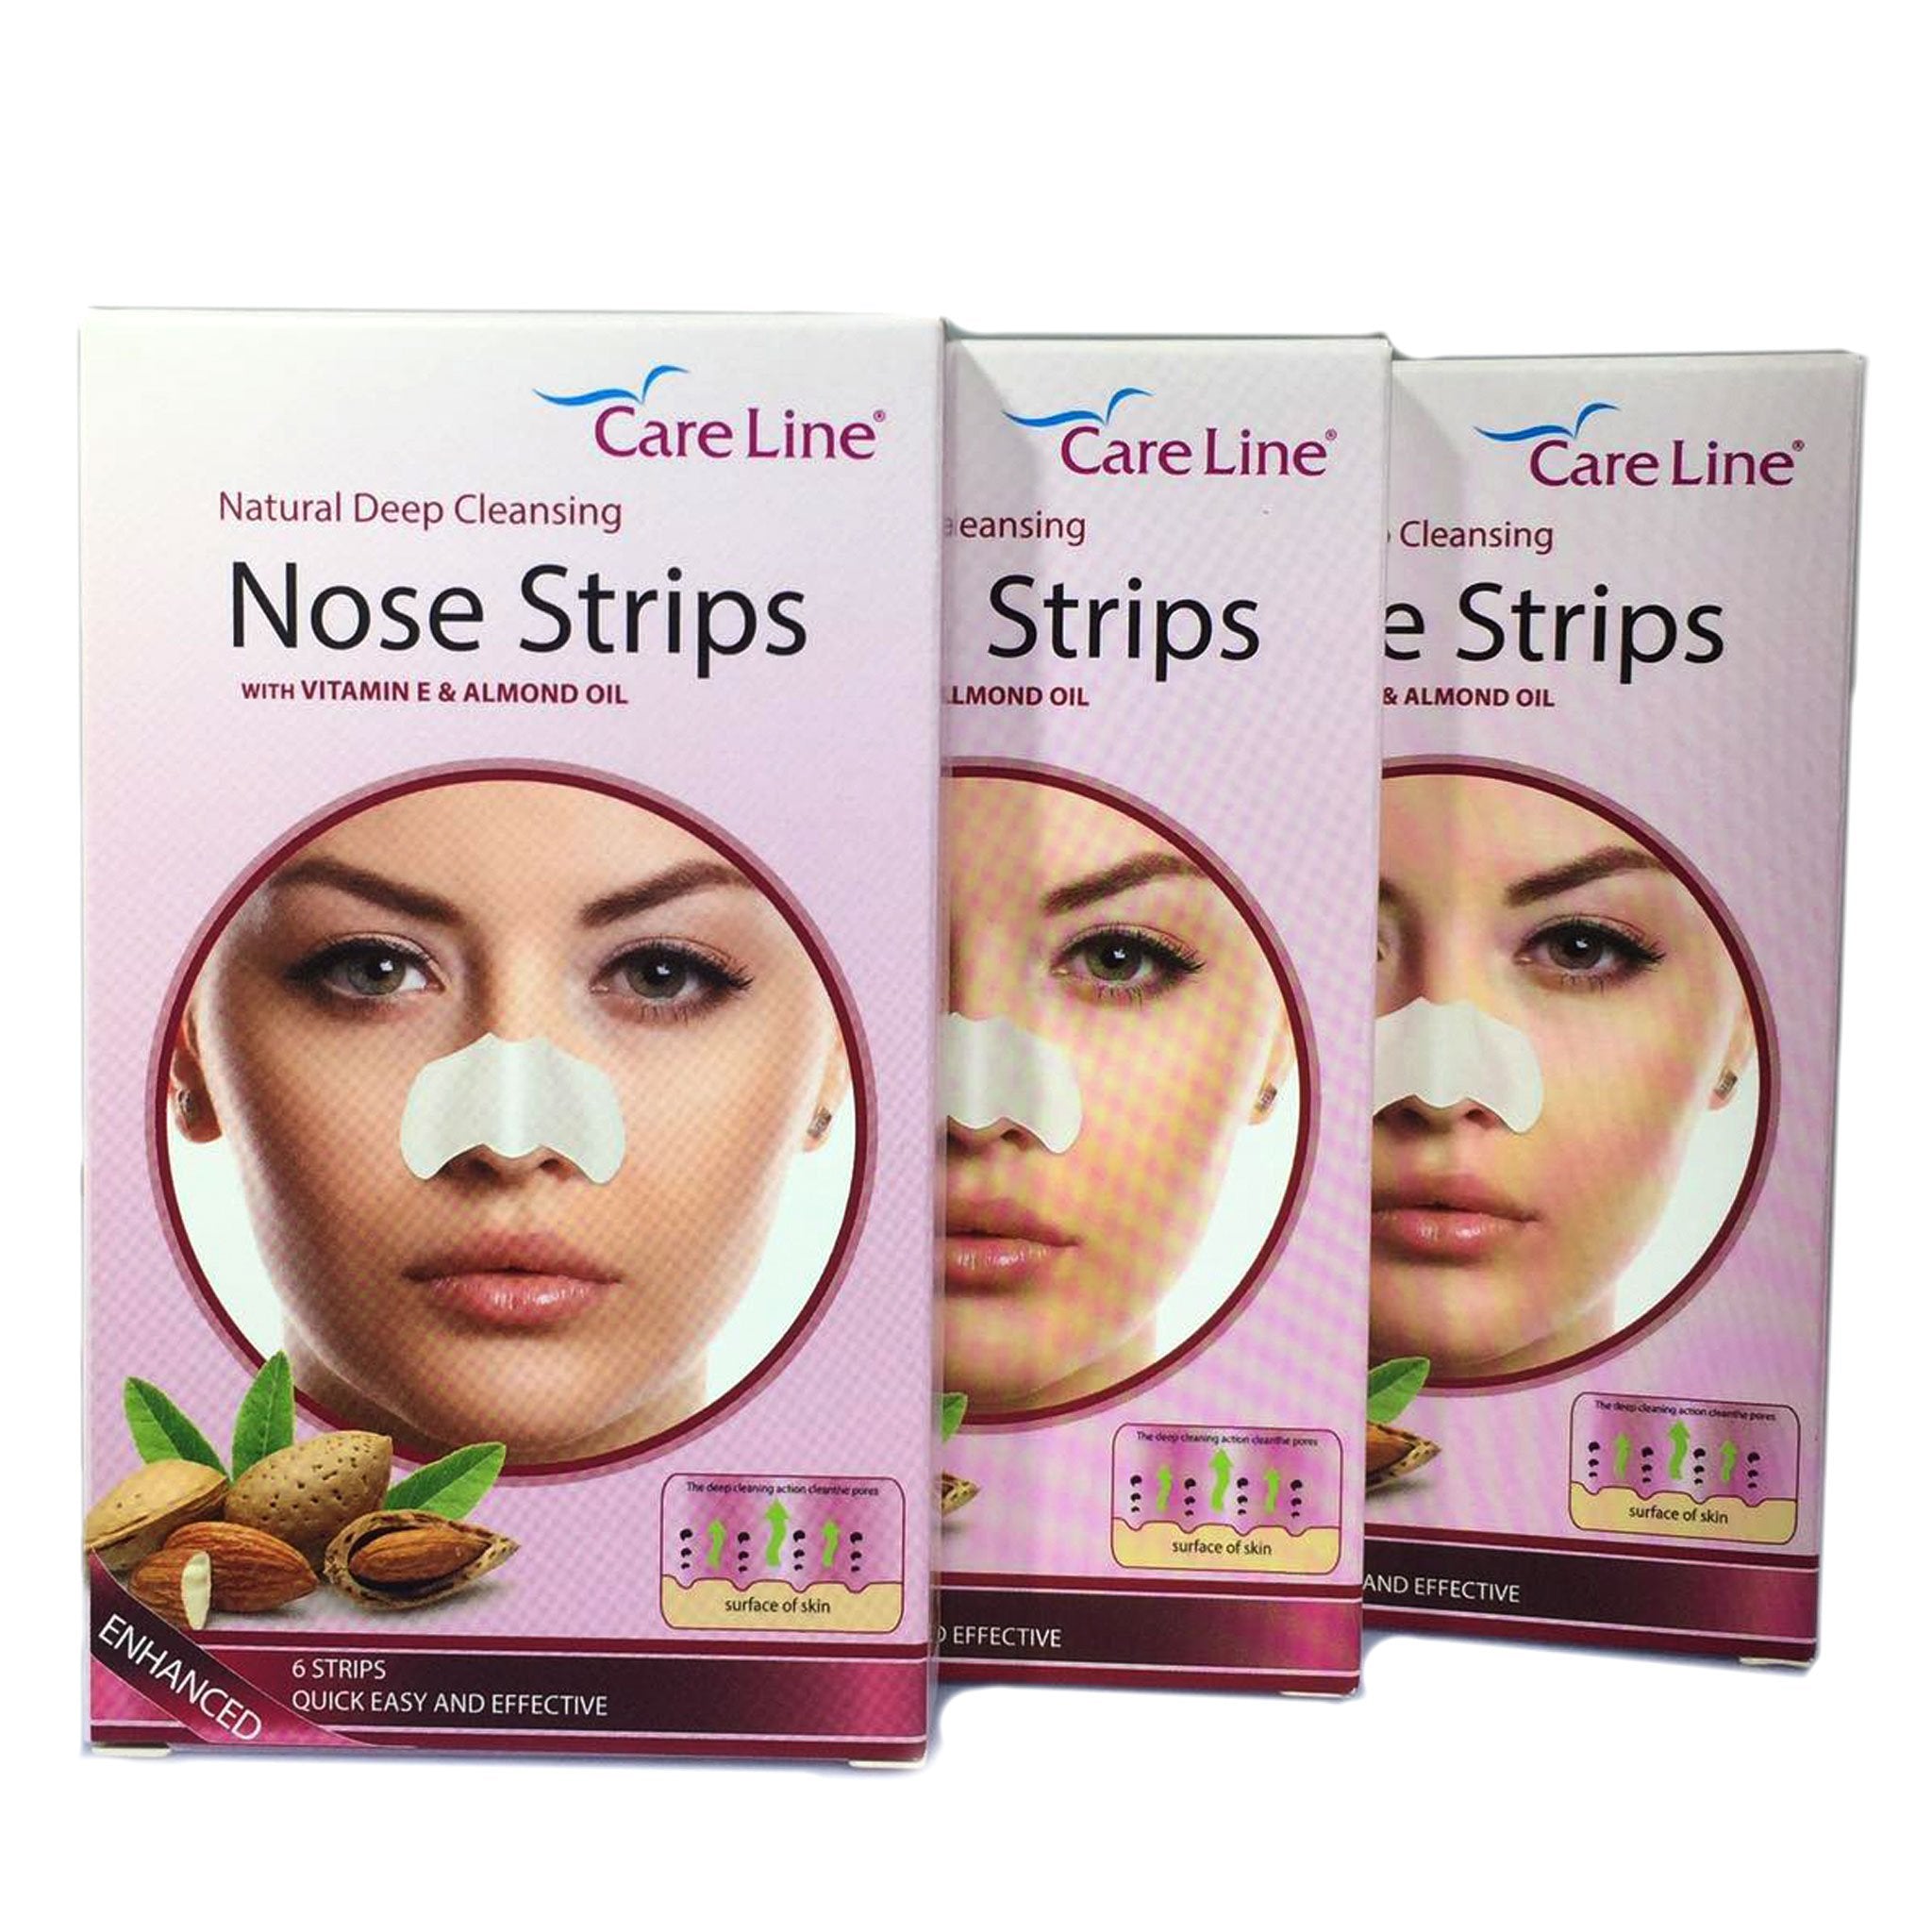 Care Line Nose Strips 6 Strips with Vitamin E and Almond Oil 1Pc Value Pack of 3 